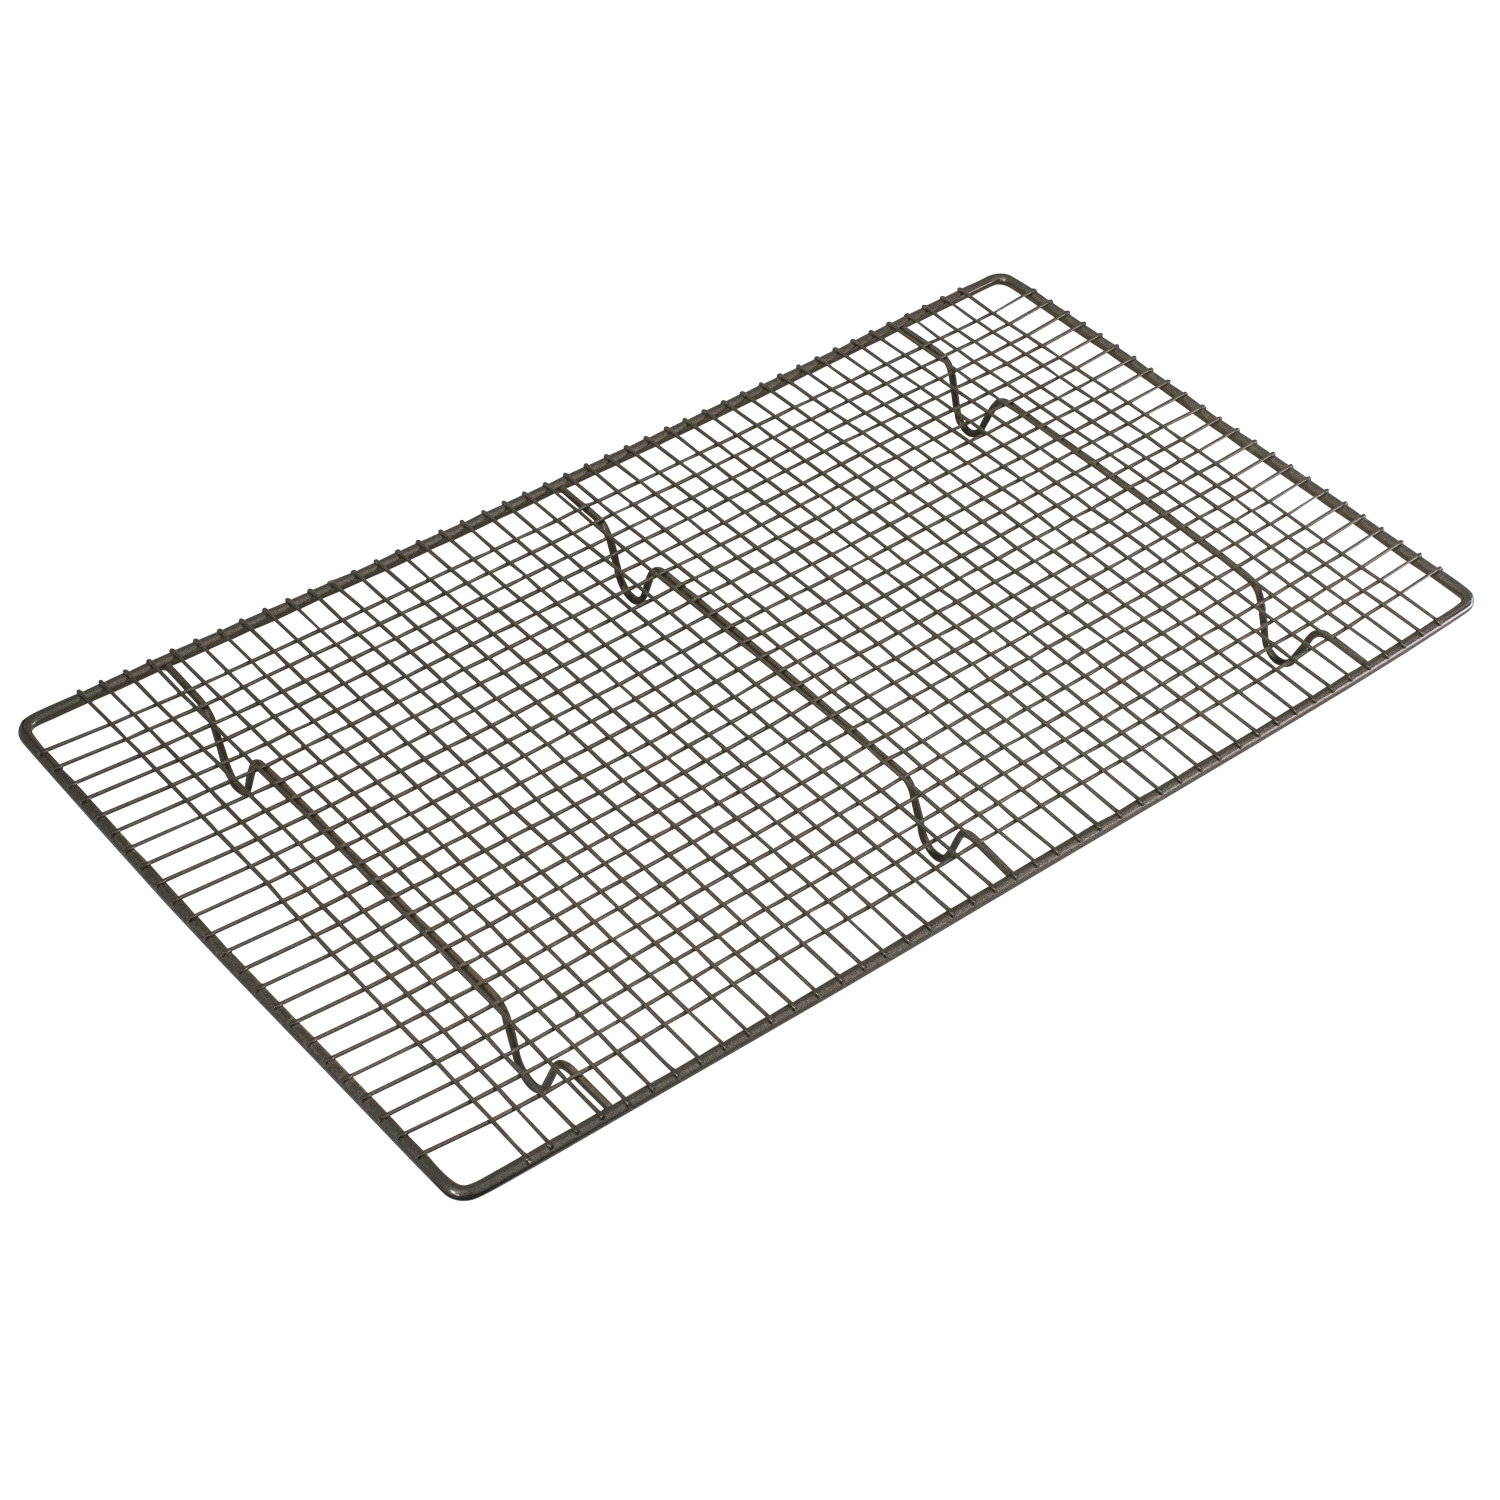 Bakemaster Cooling Tray 46X25CM